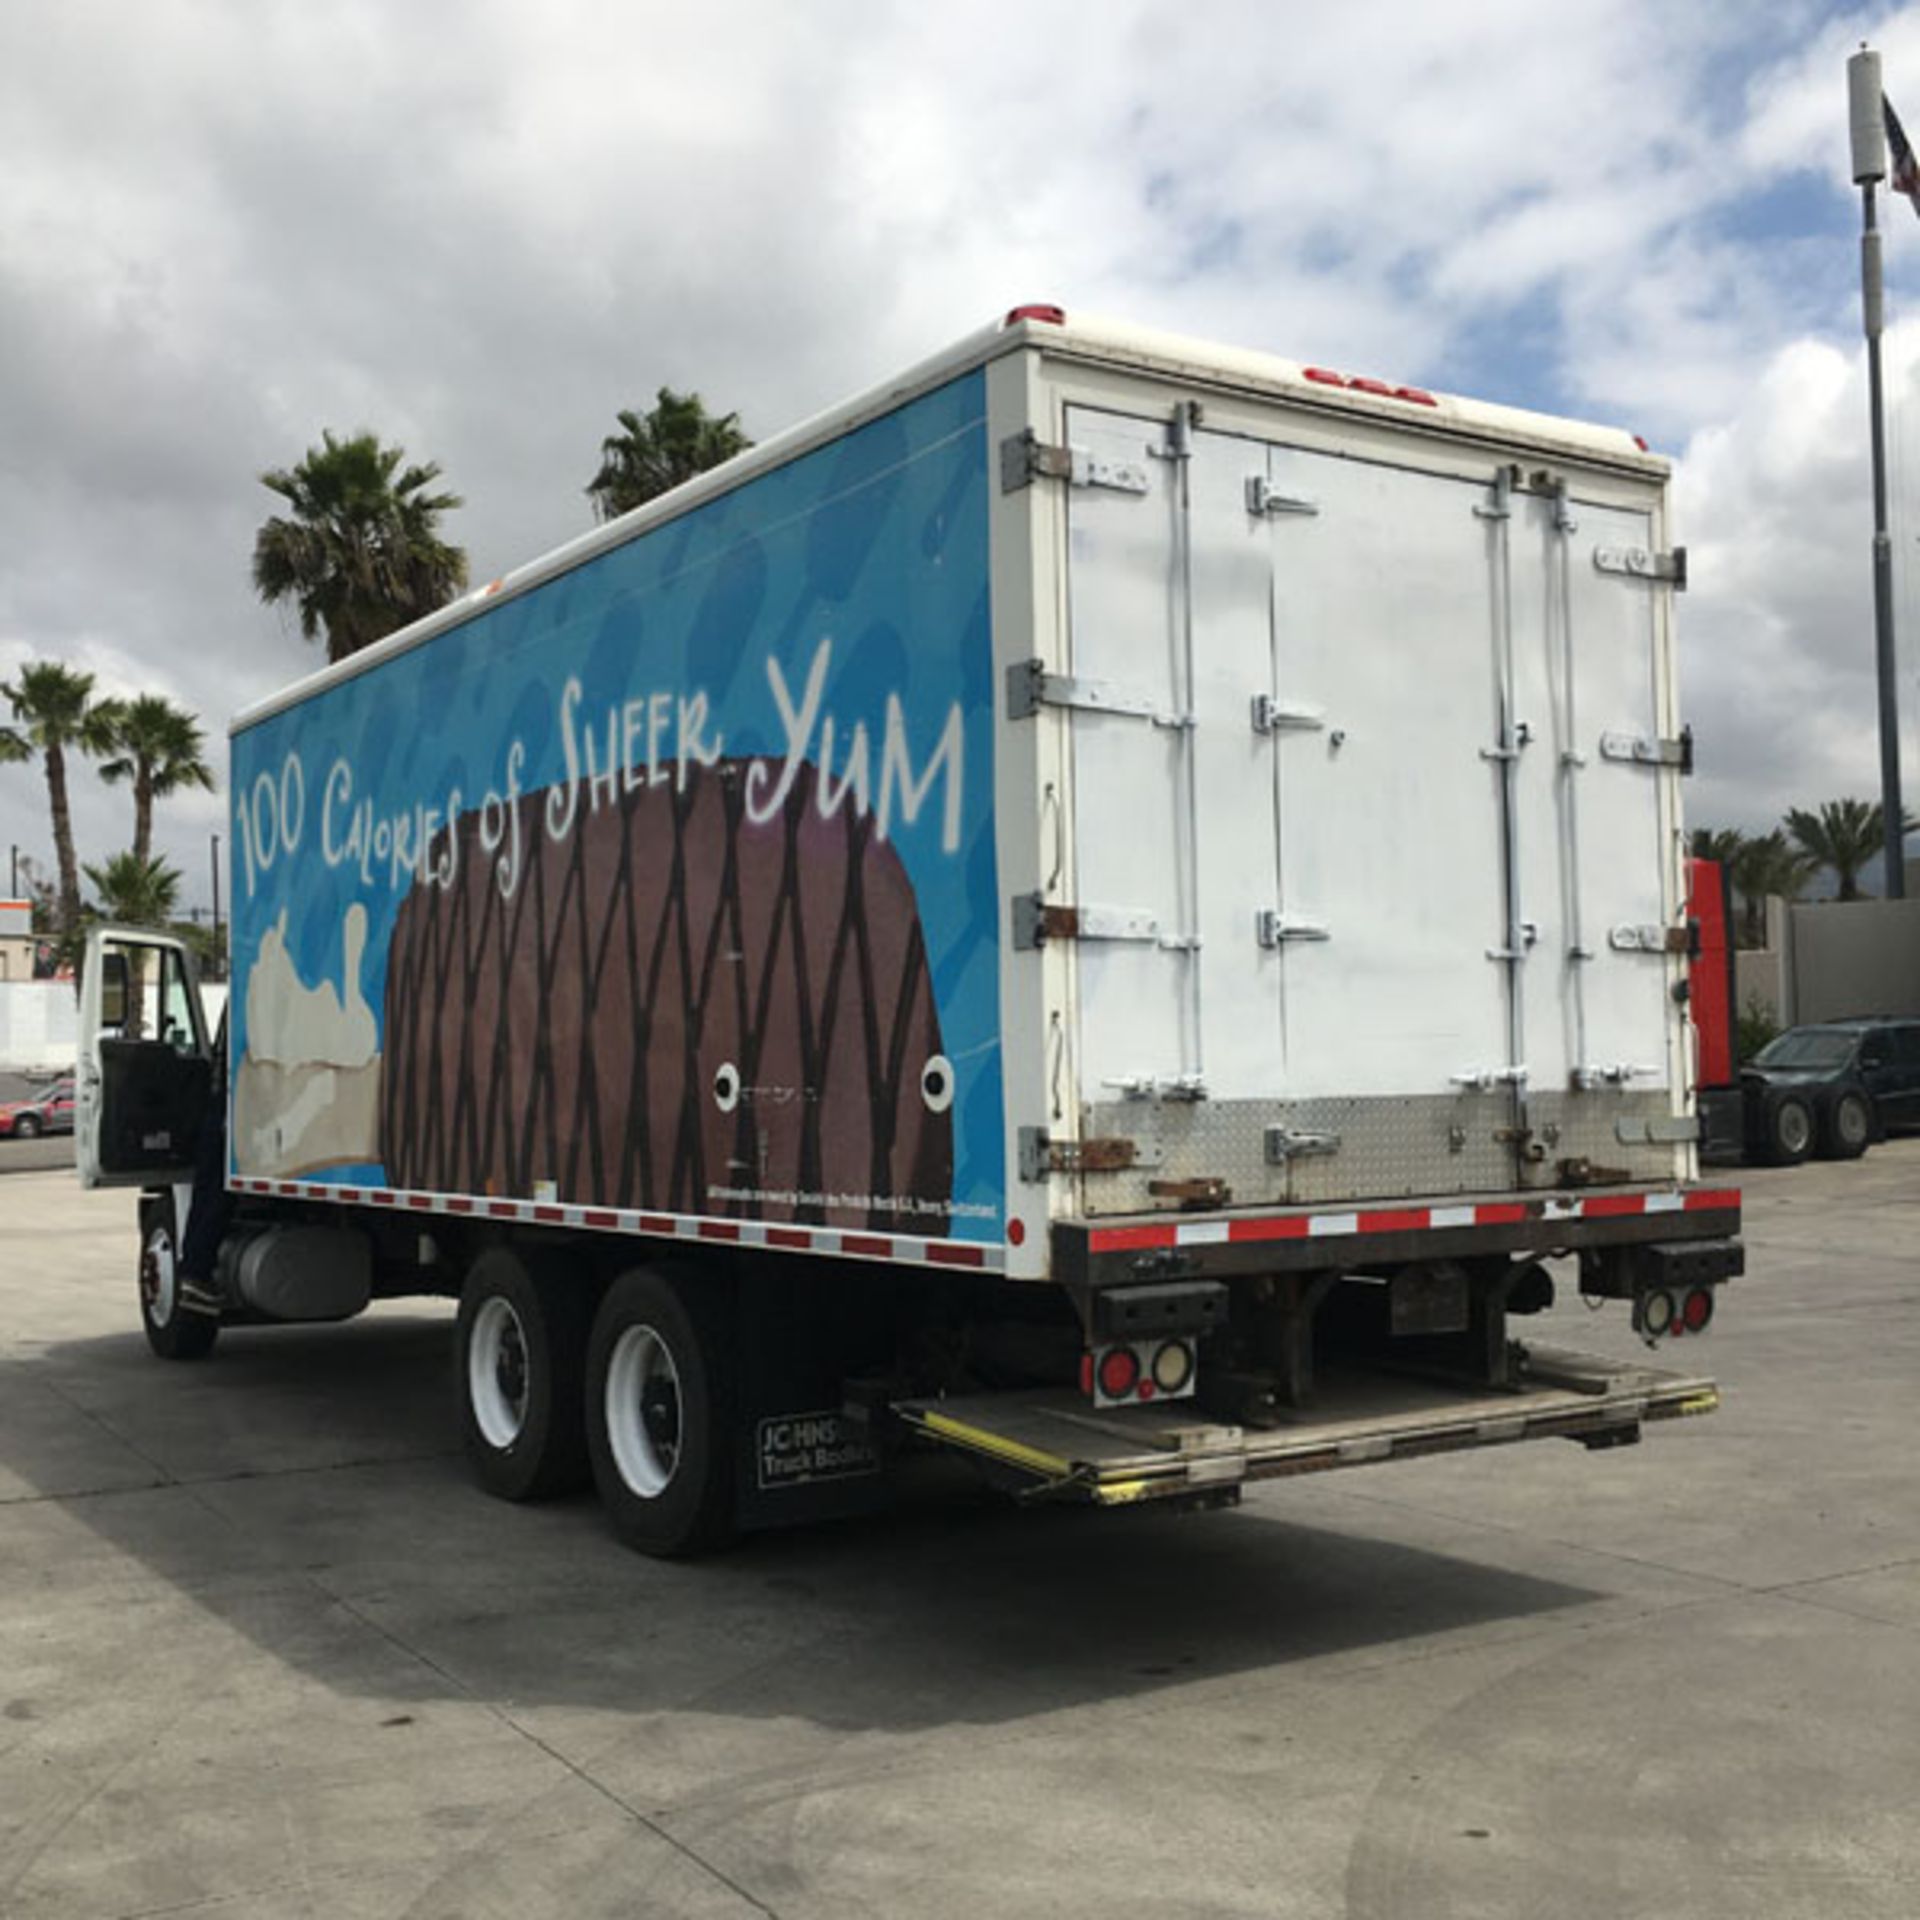 2018 INTERNATIONAL 4400 SBA 6X4 REFRIGERATED BOX TRUCK VIN#: 1HTMSTAR0JH049067, Approx Miles: 13174, - Image 6 of 8